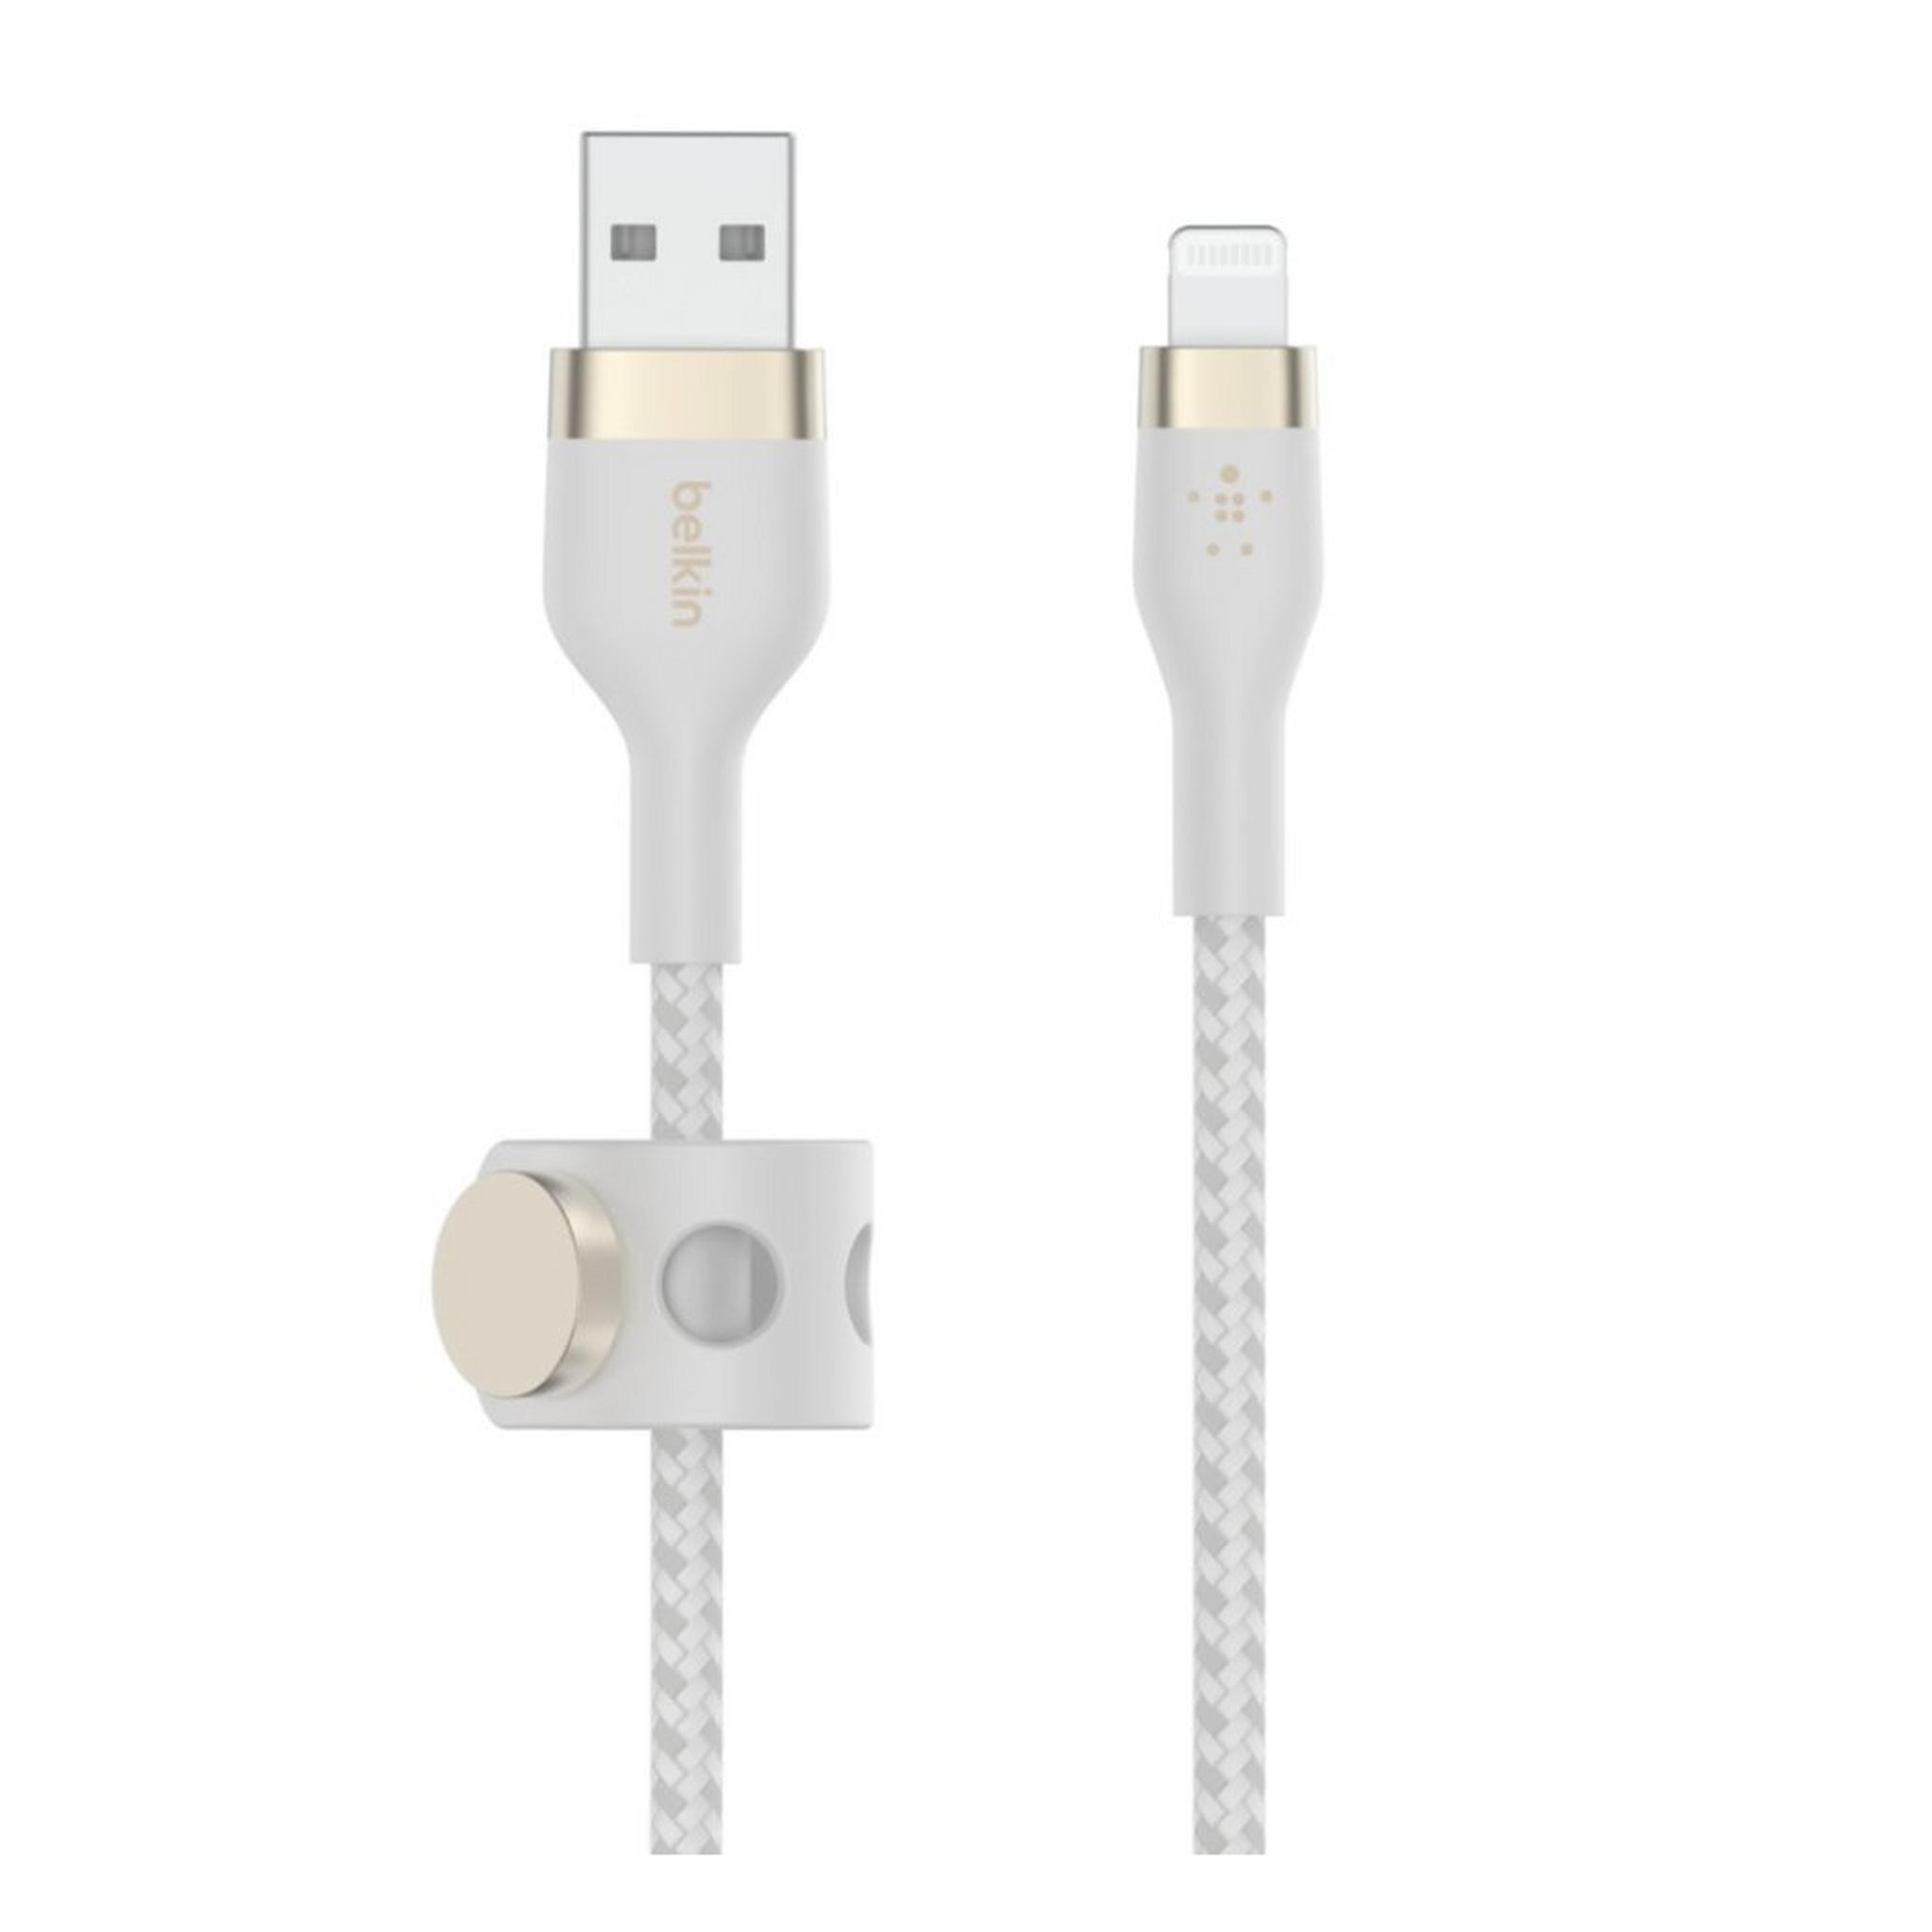 Belkin USB A to Lightning Cable 1M - White